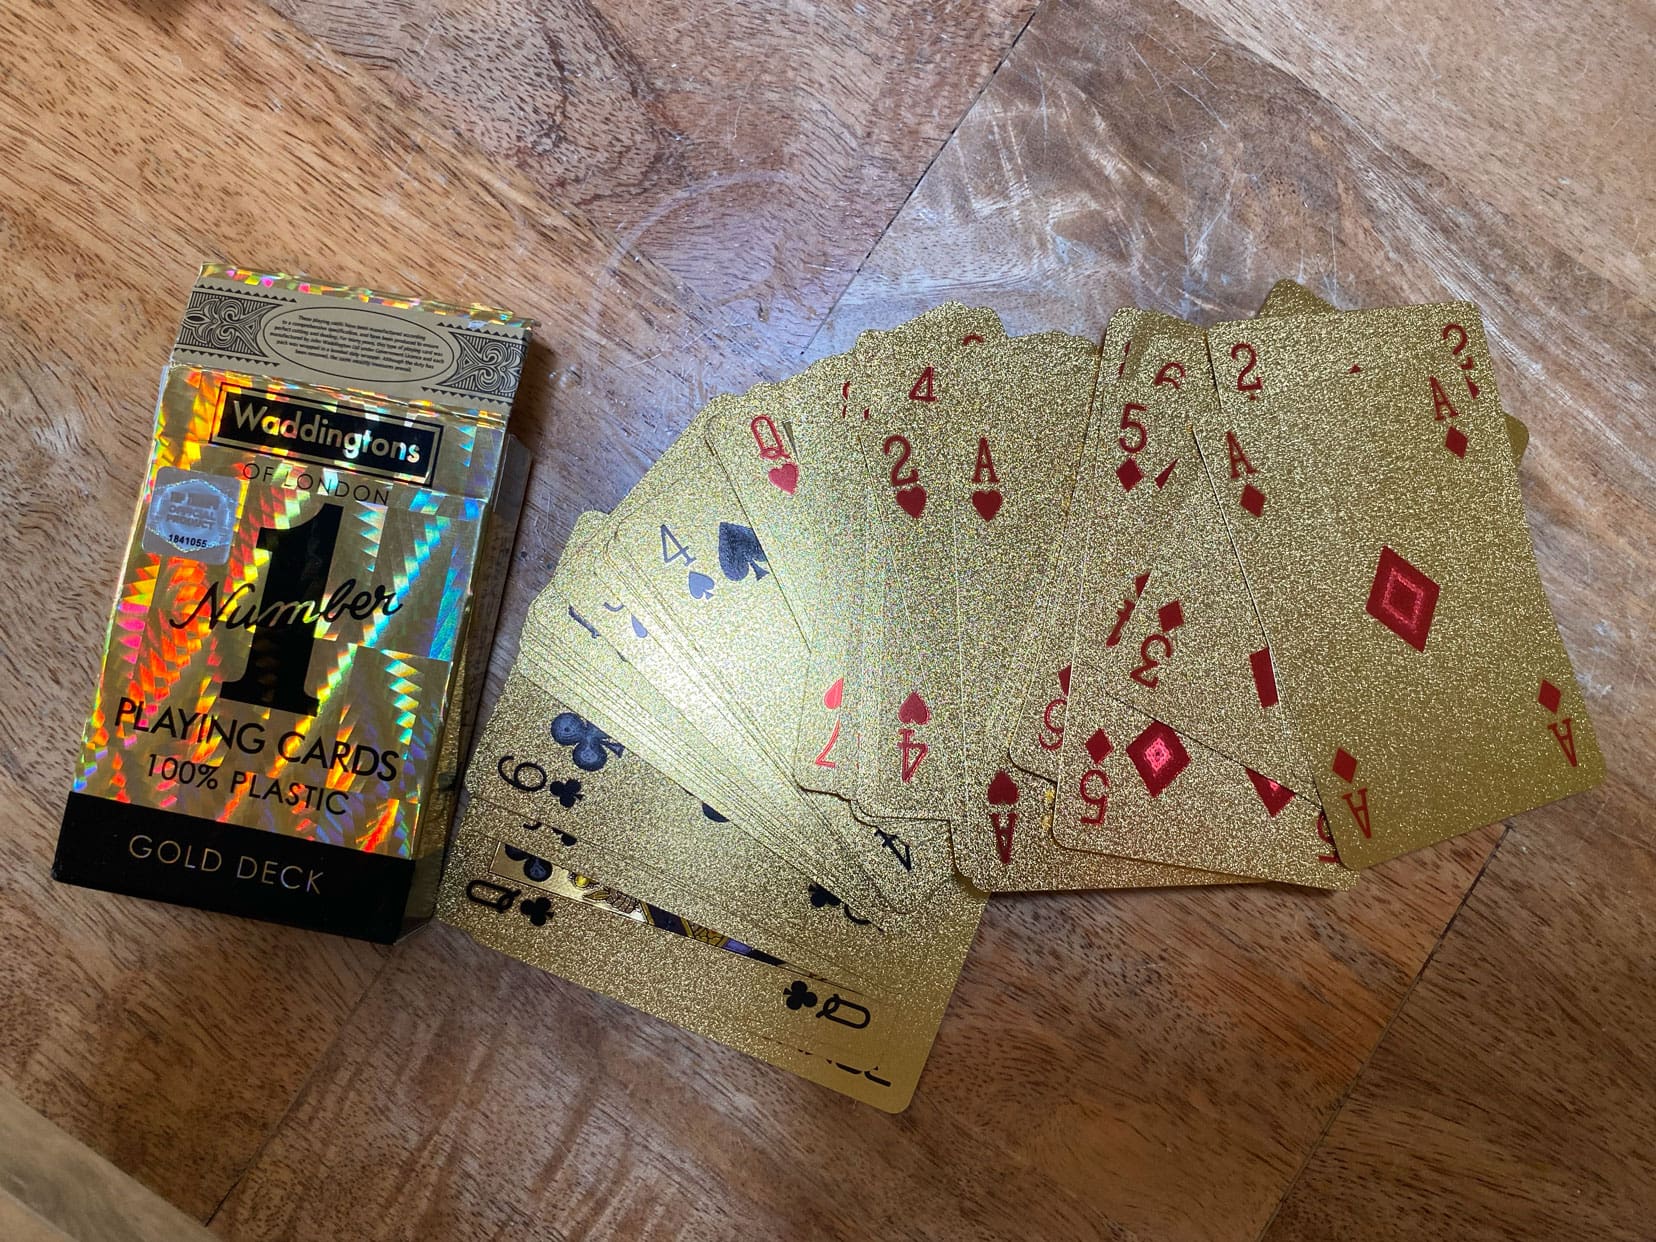 Pack of Waddingtons playing cards showing the gold cards and the box